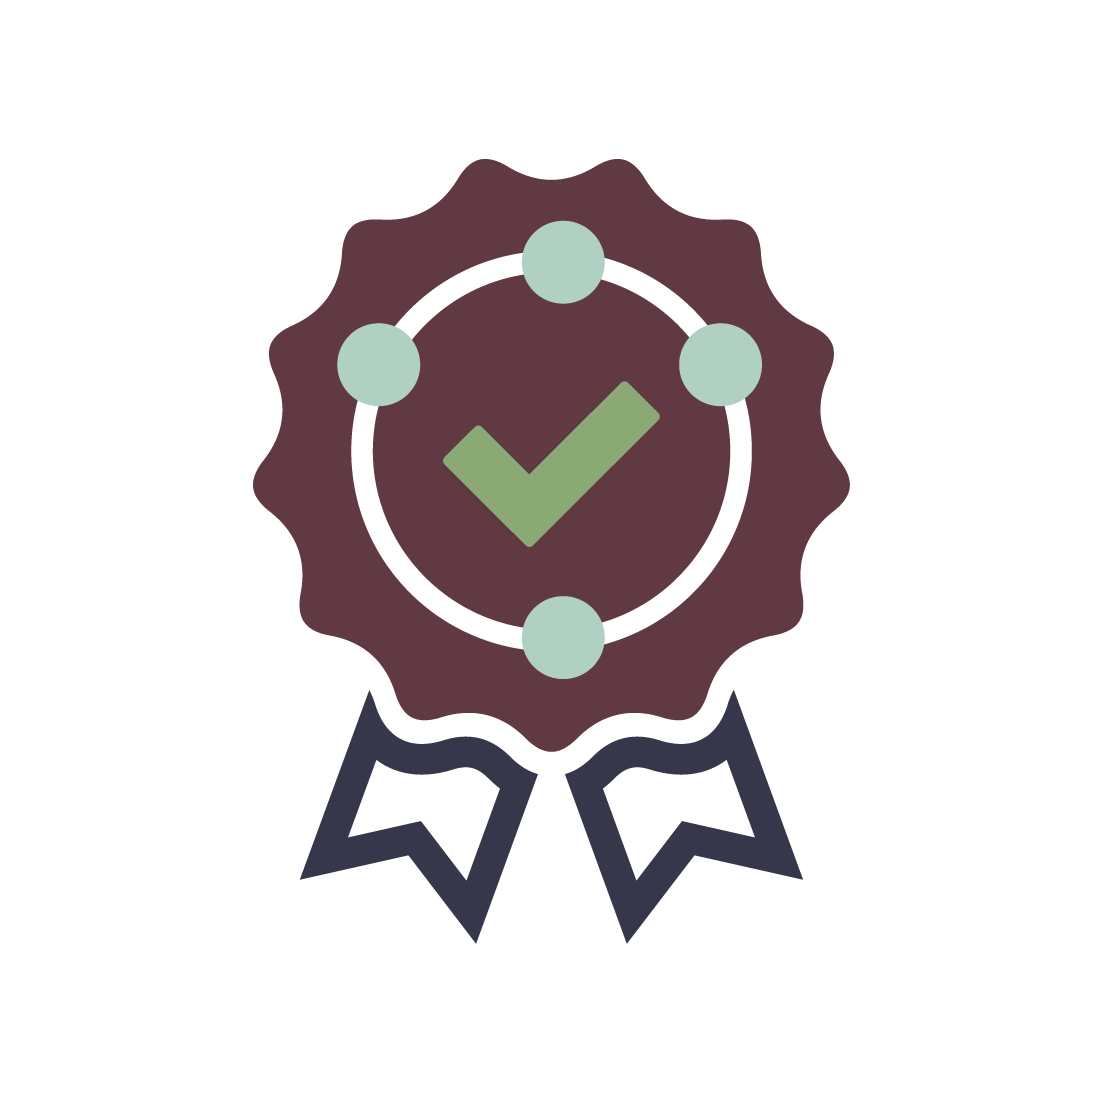 Completion badge icon.